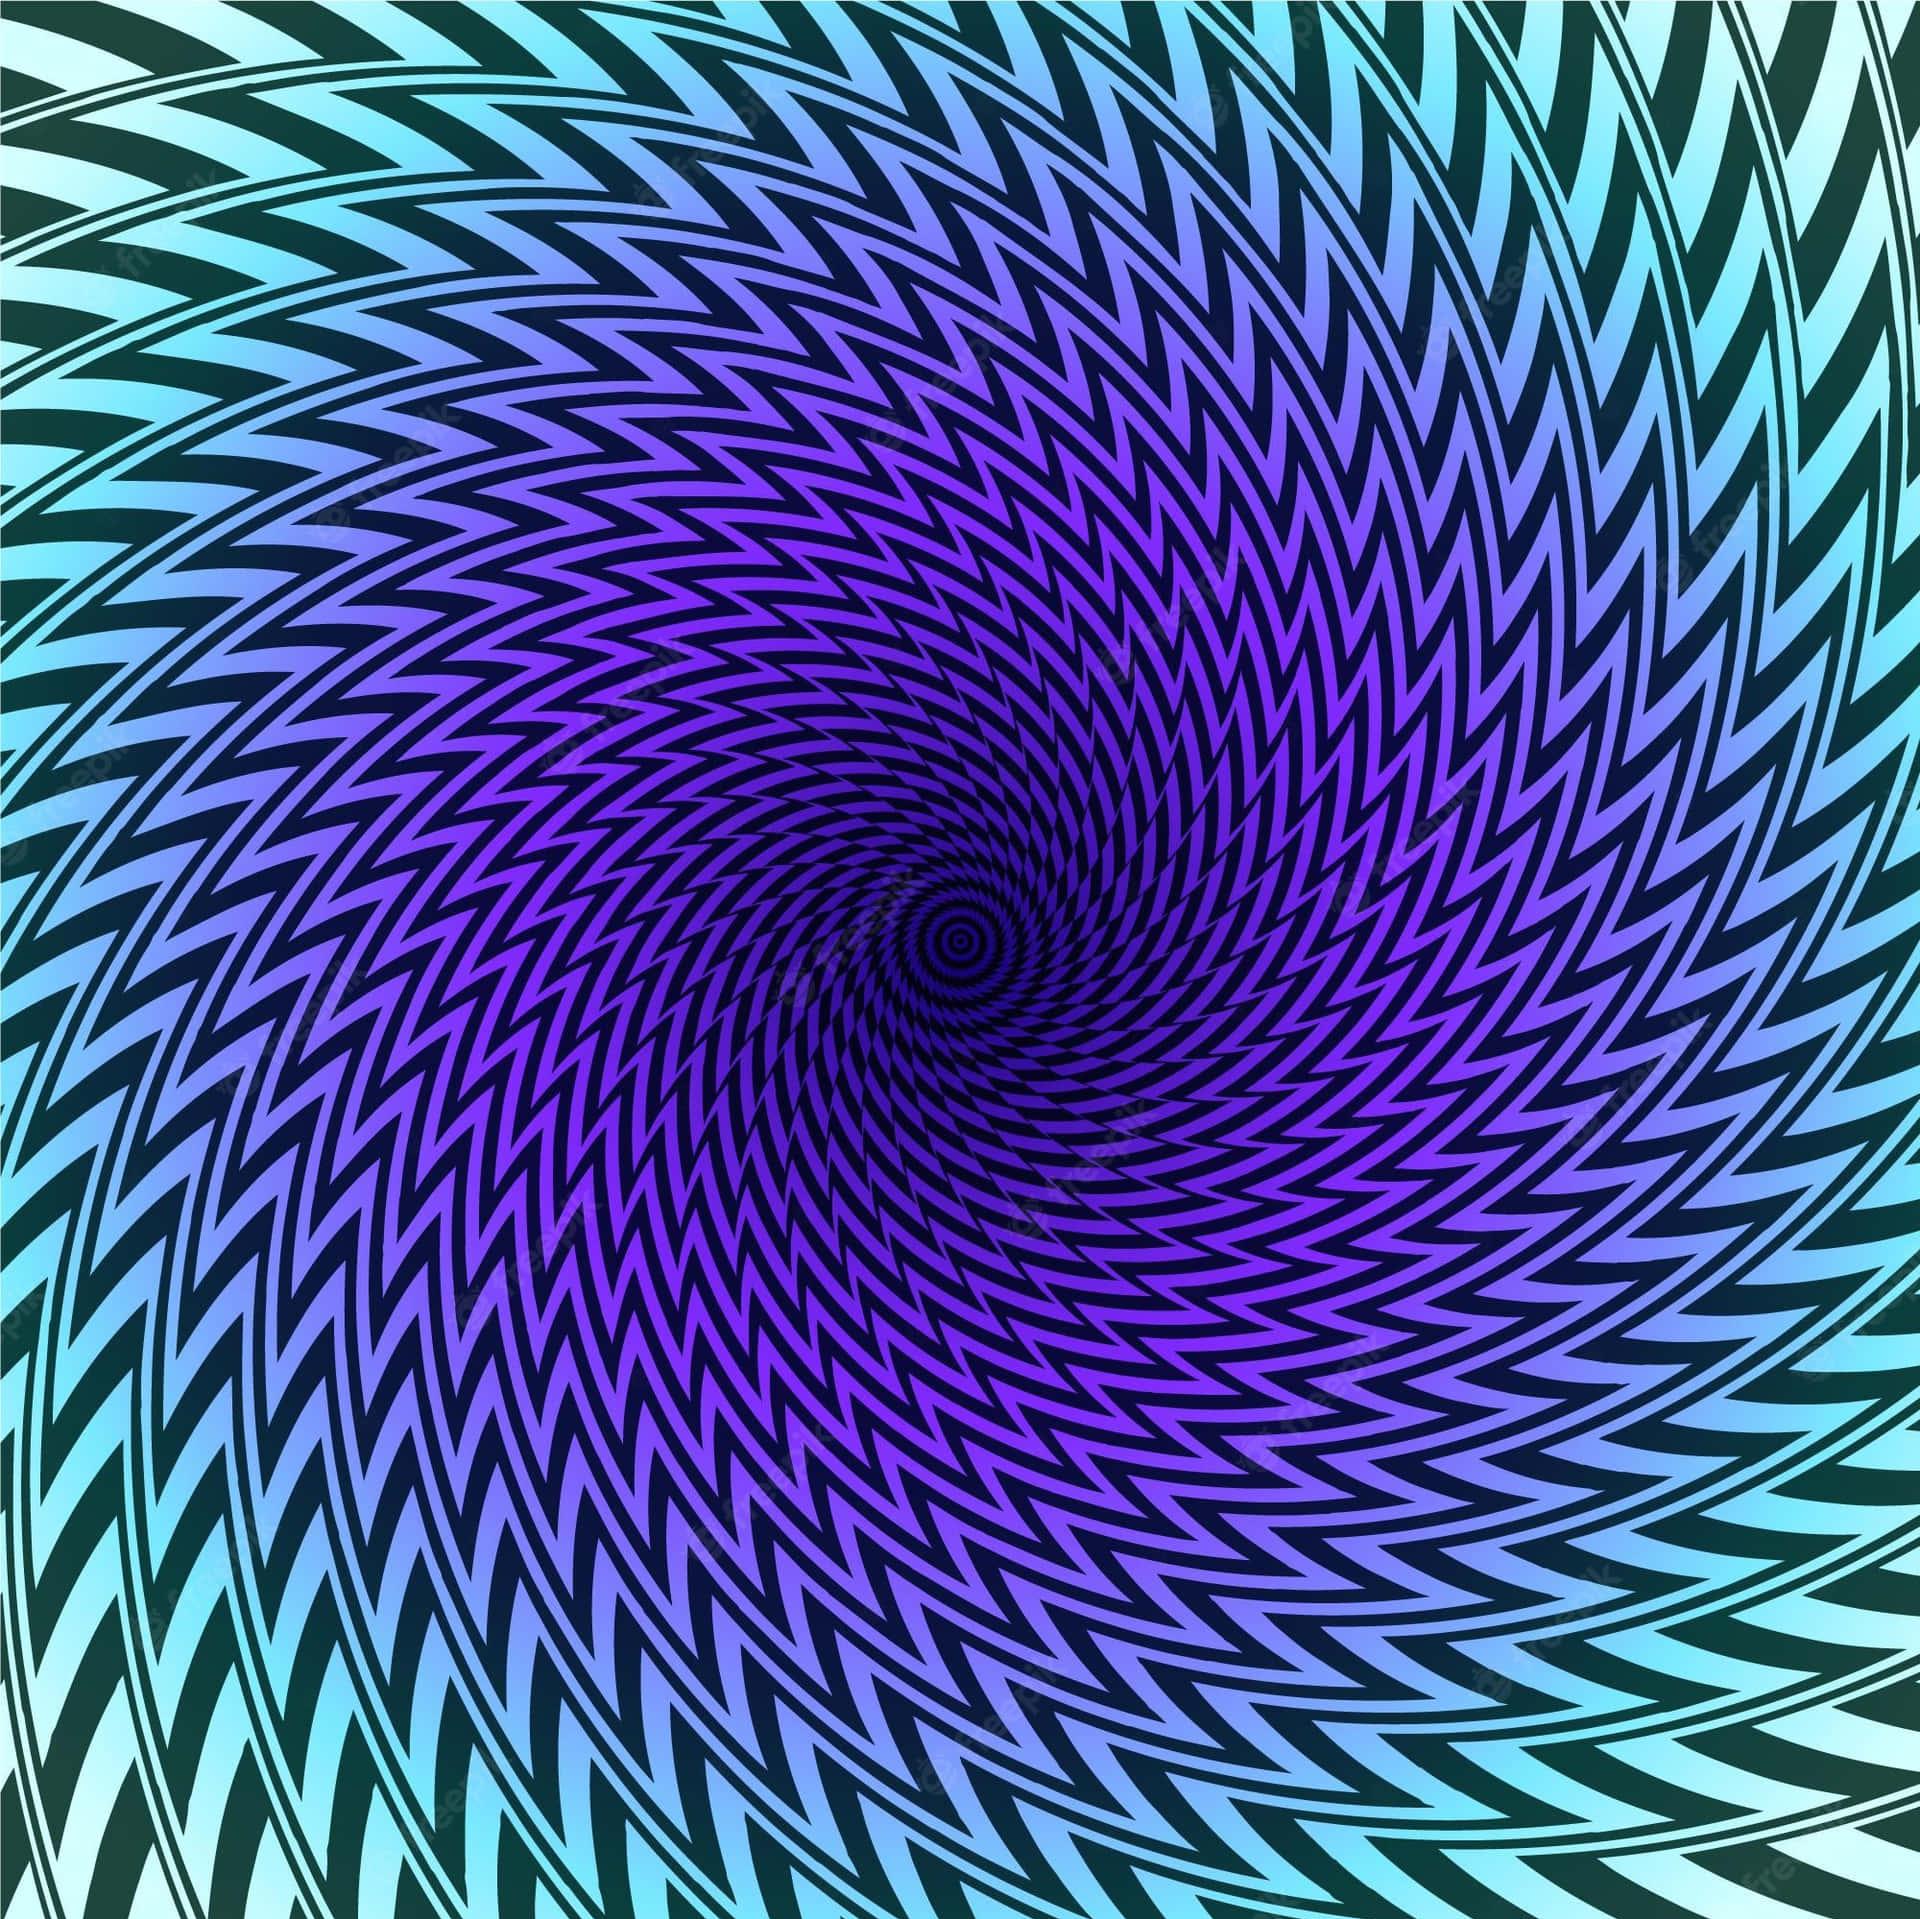 Experience Optical Illusions That Trick Your Mind